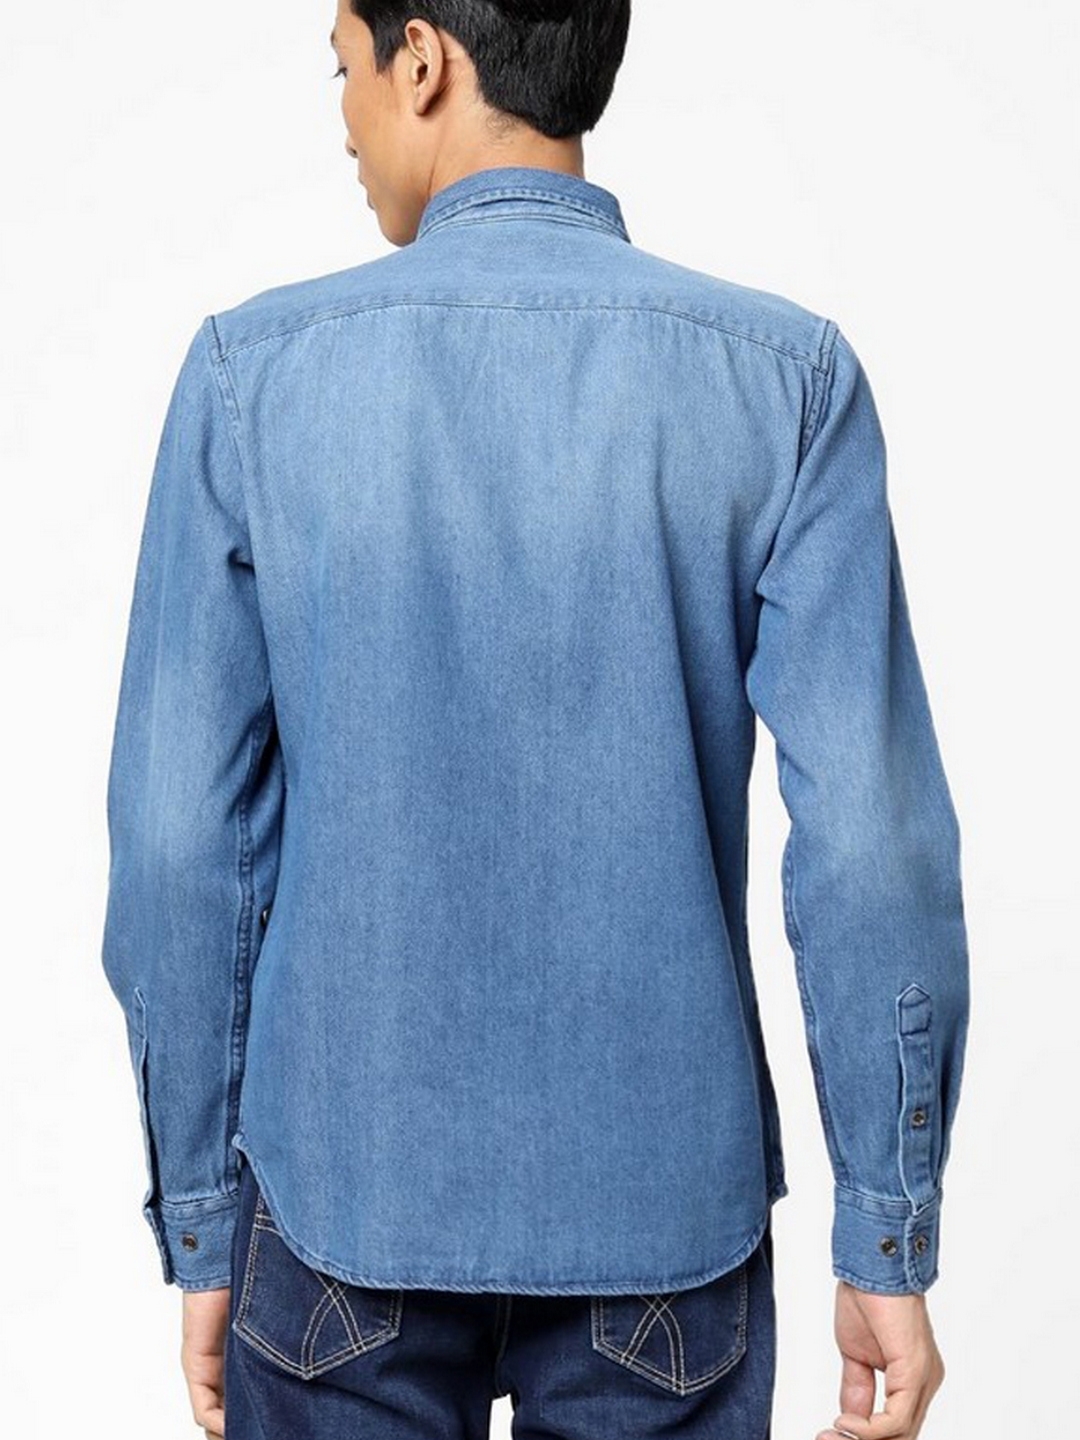 How To Wear Men's Denim Shirts (Everything You Need To Know)